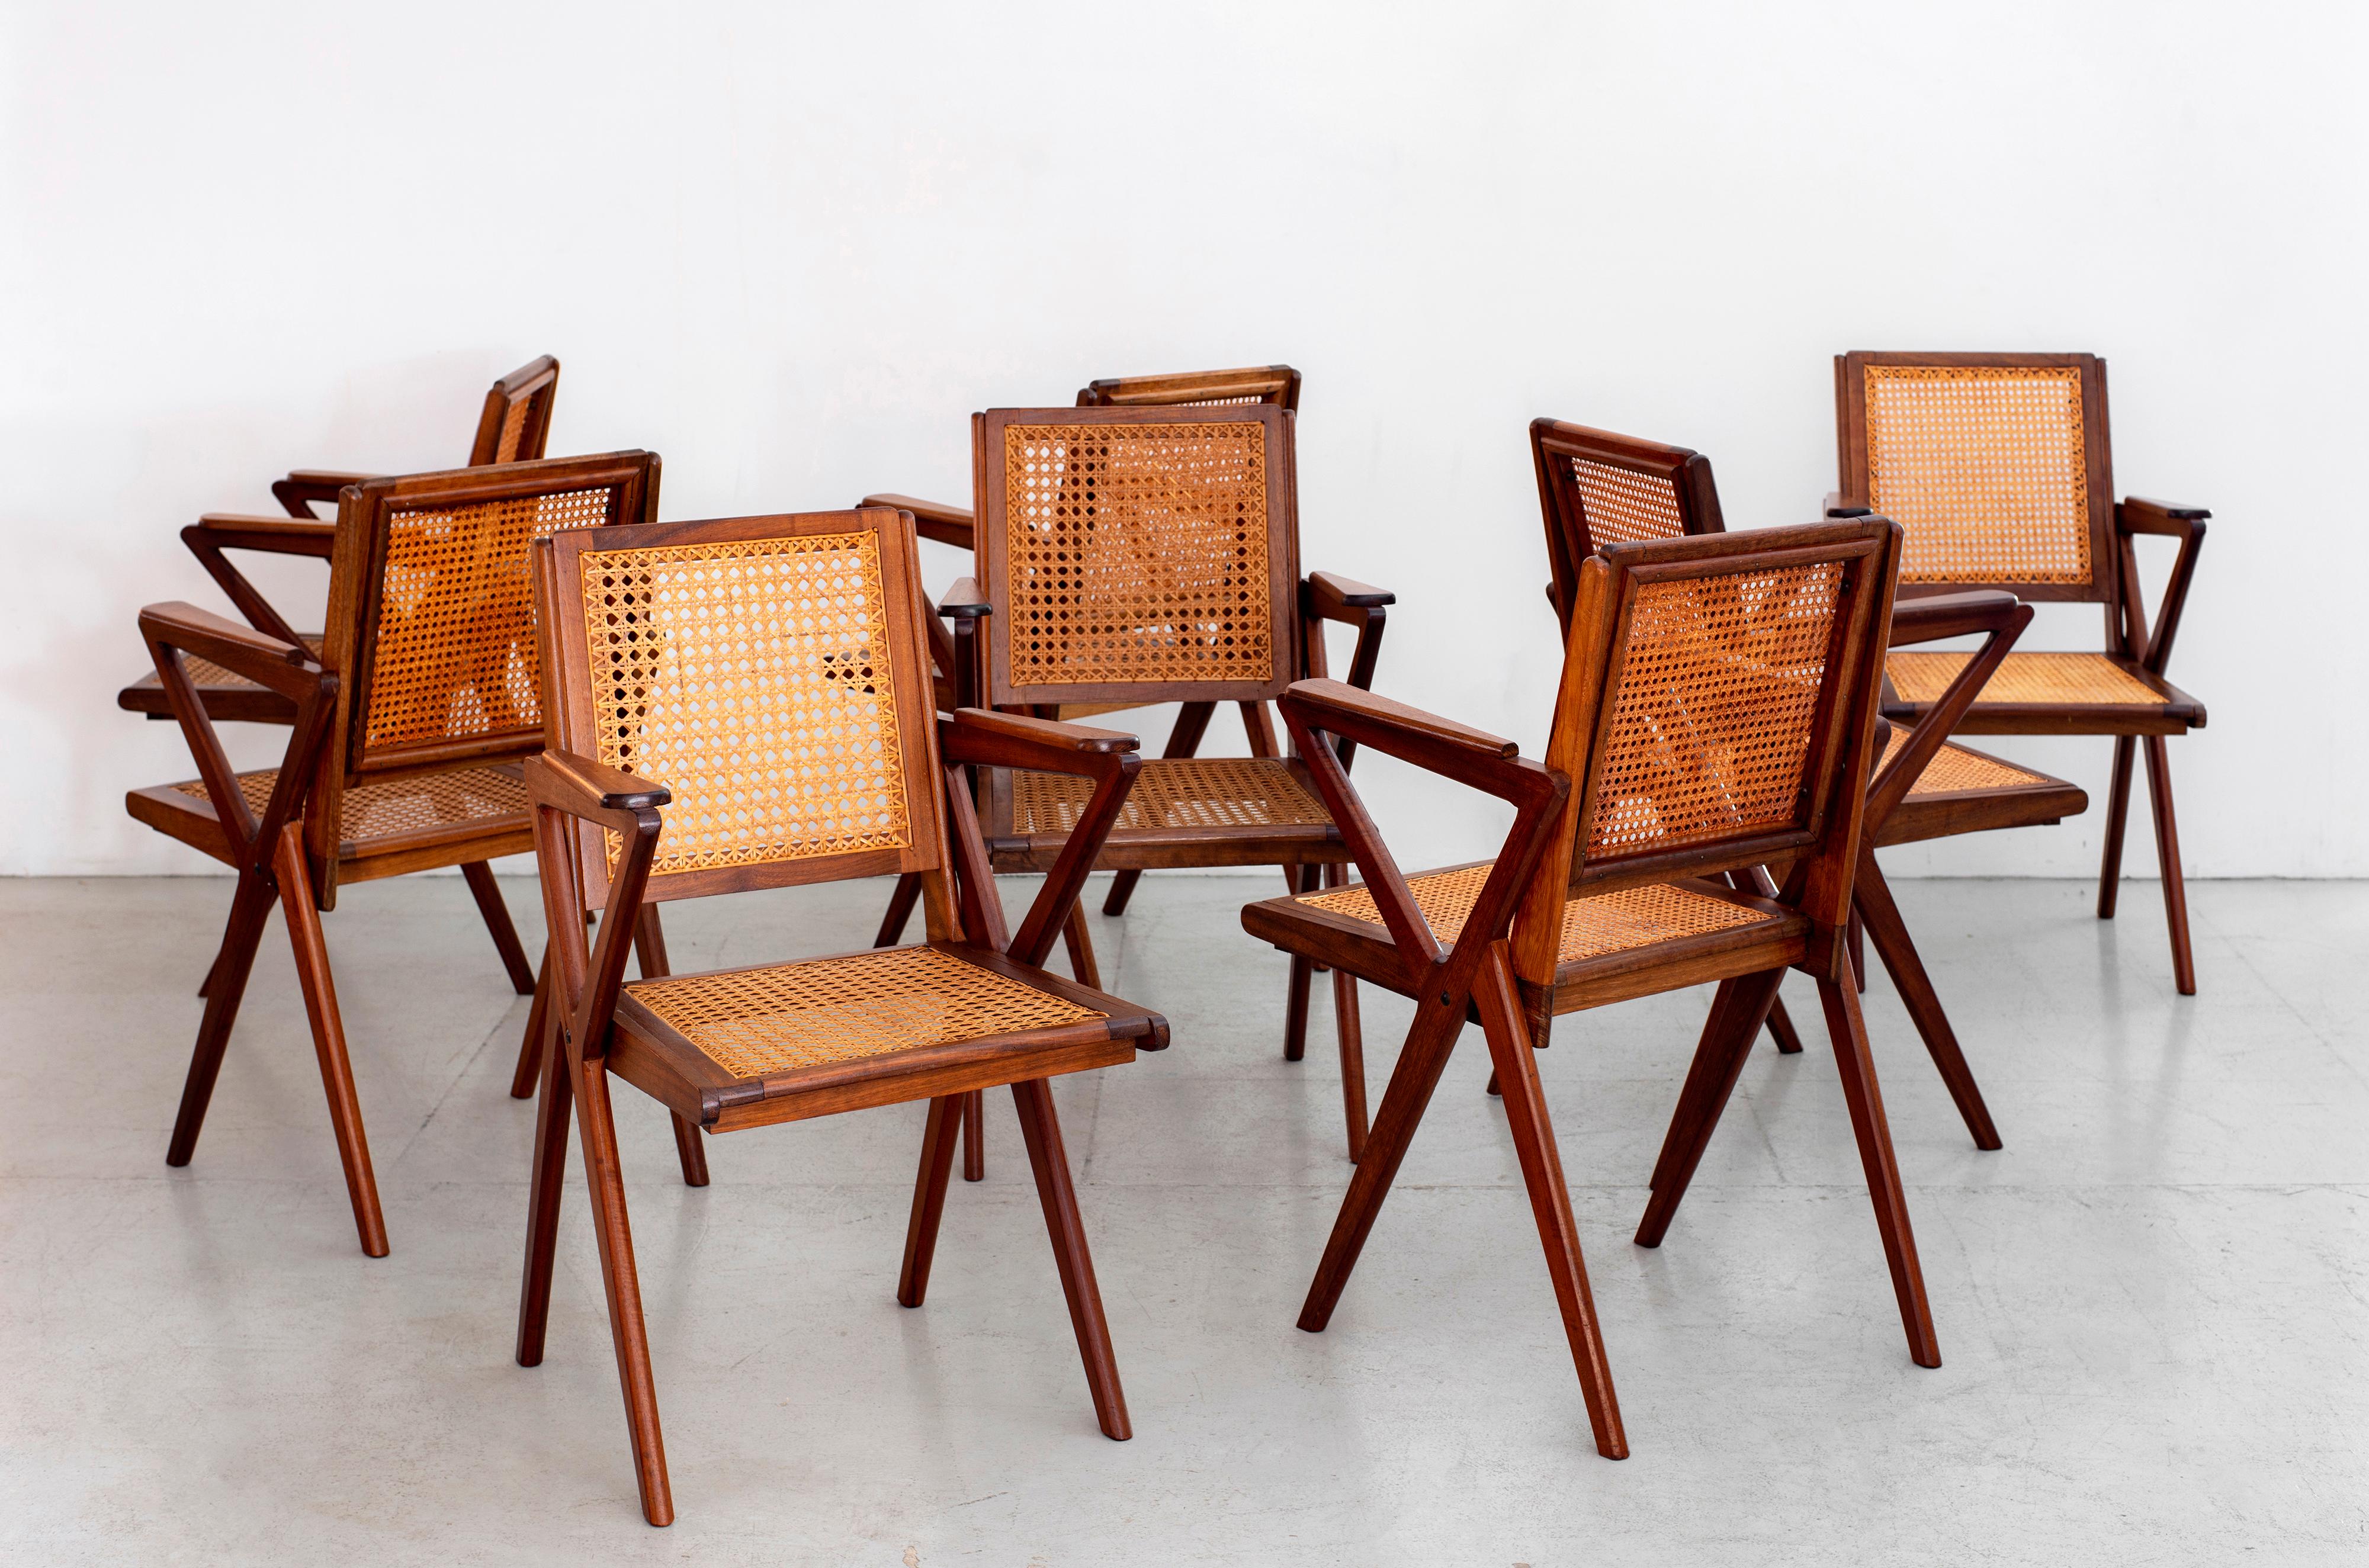 Great set of 8 teak and caned dining room chairs, French, circa 1950s
In the style of Pierre Jeanneret with fantastic angles and design.
Warm wood patina, restored.